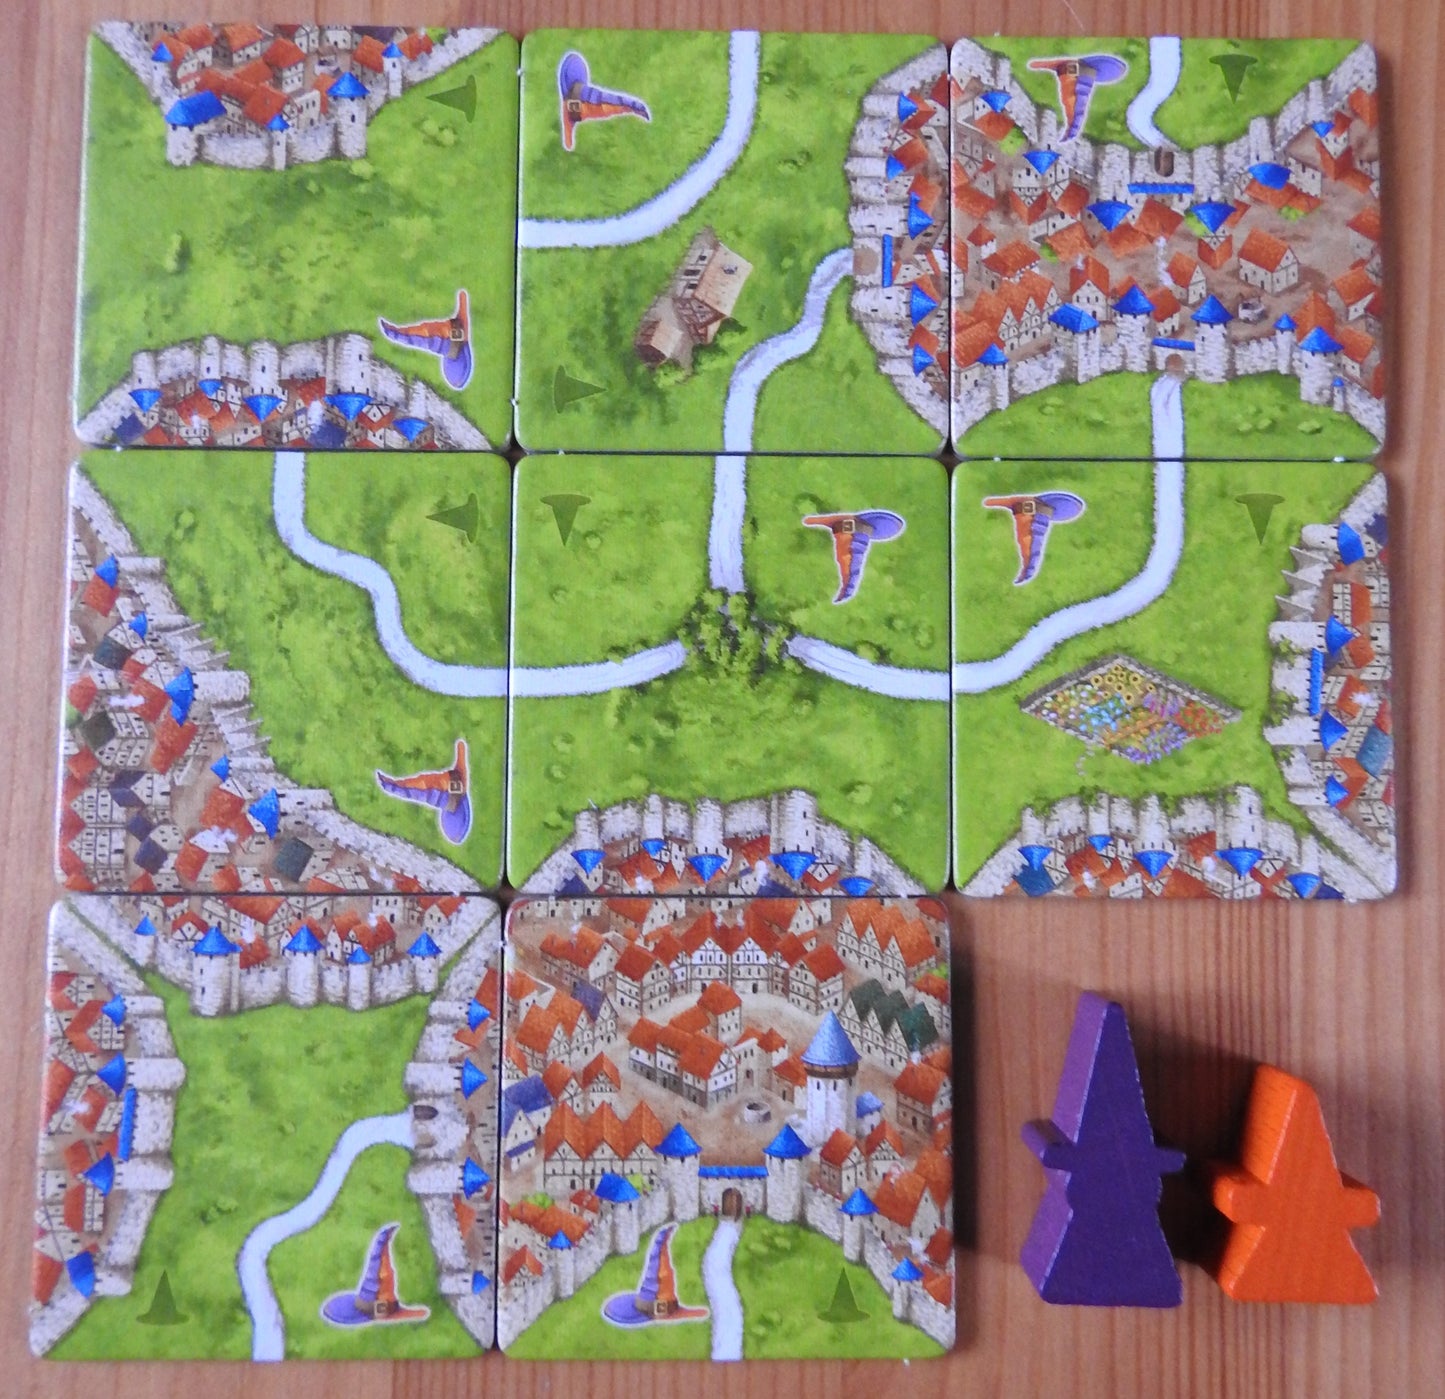 View of the landscape tiles and special meeple figures included in this Carcassonne Mage & Witch expansion.